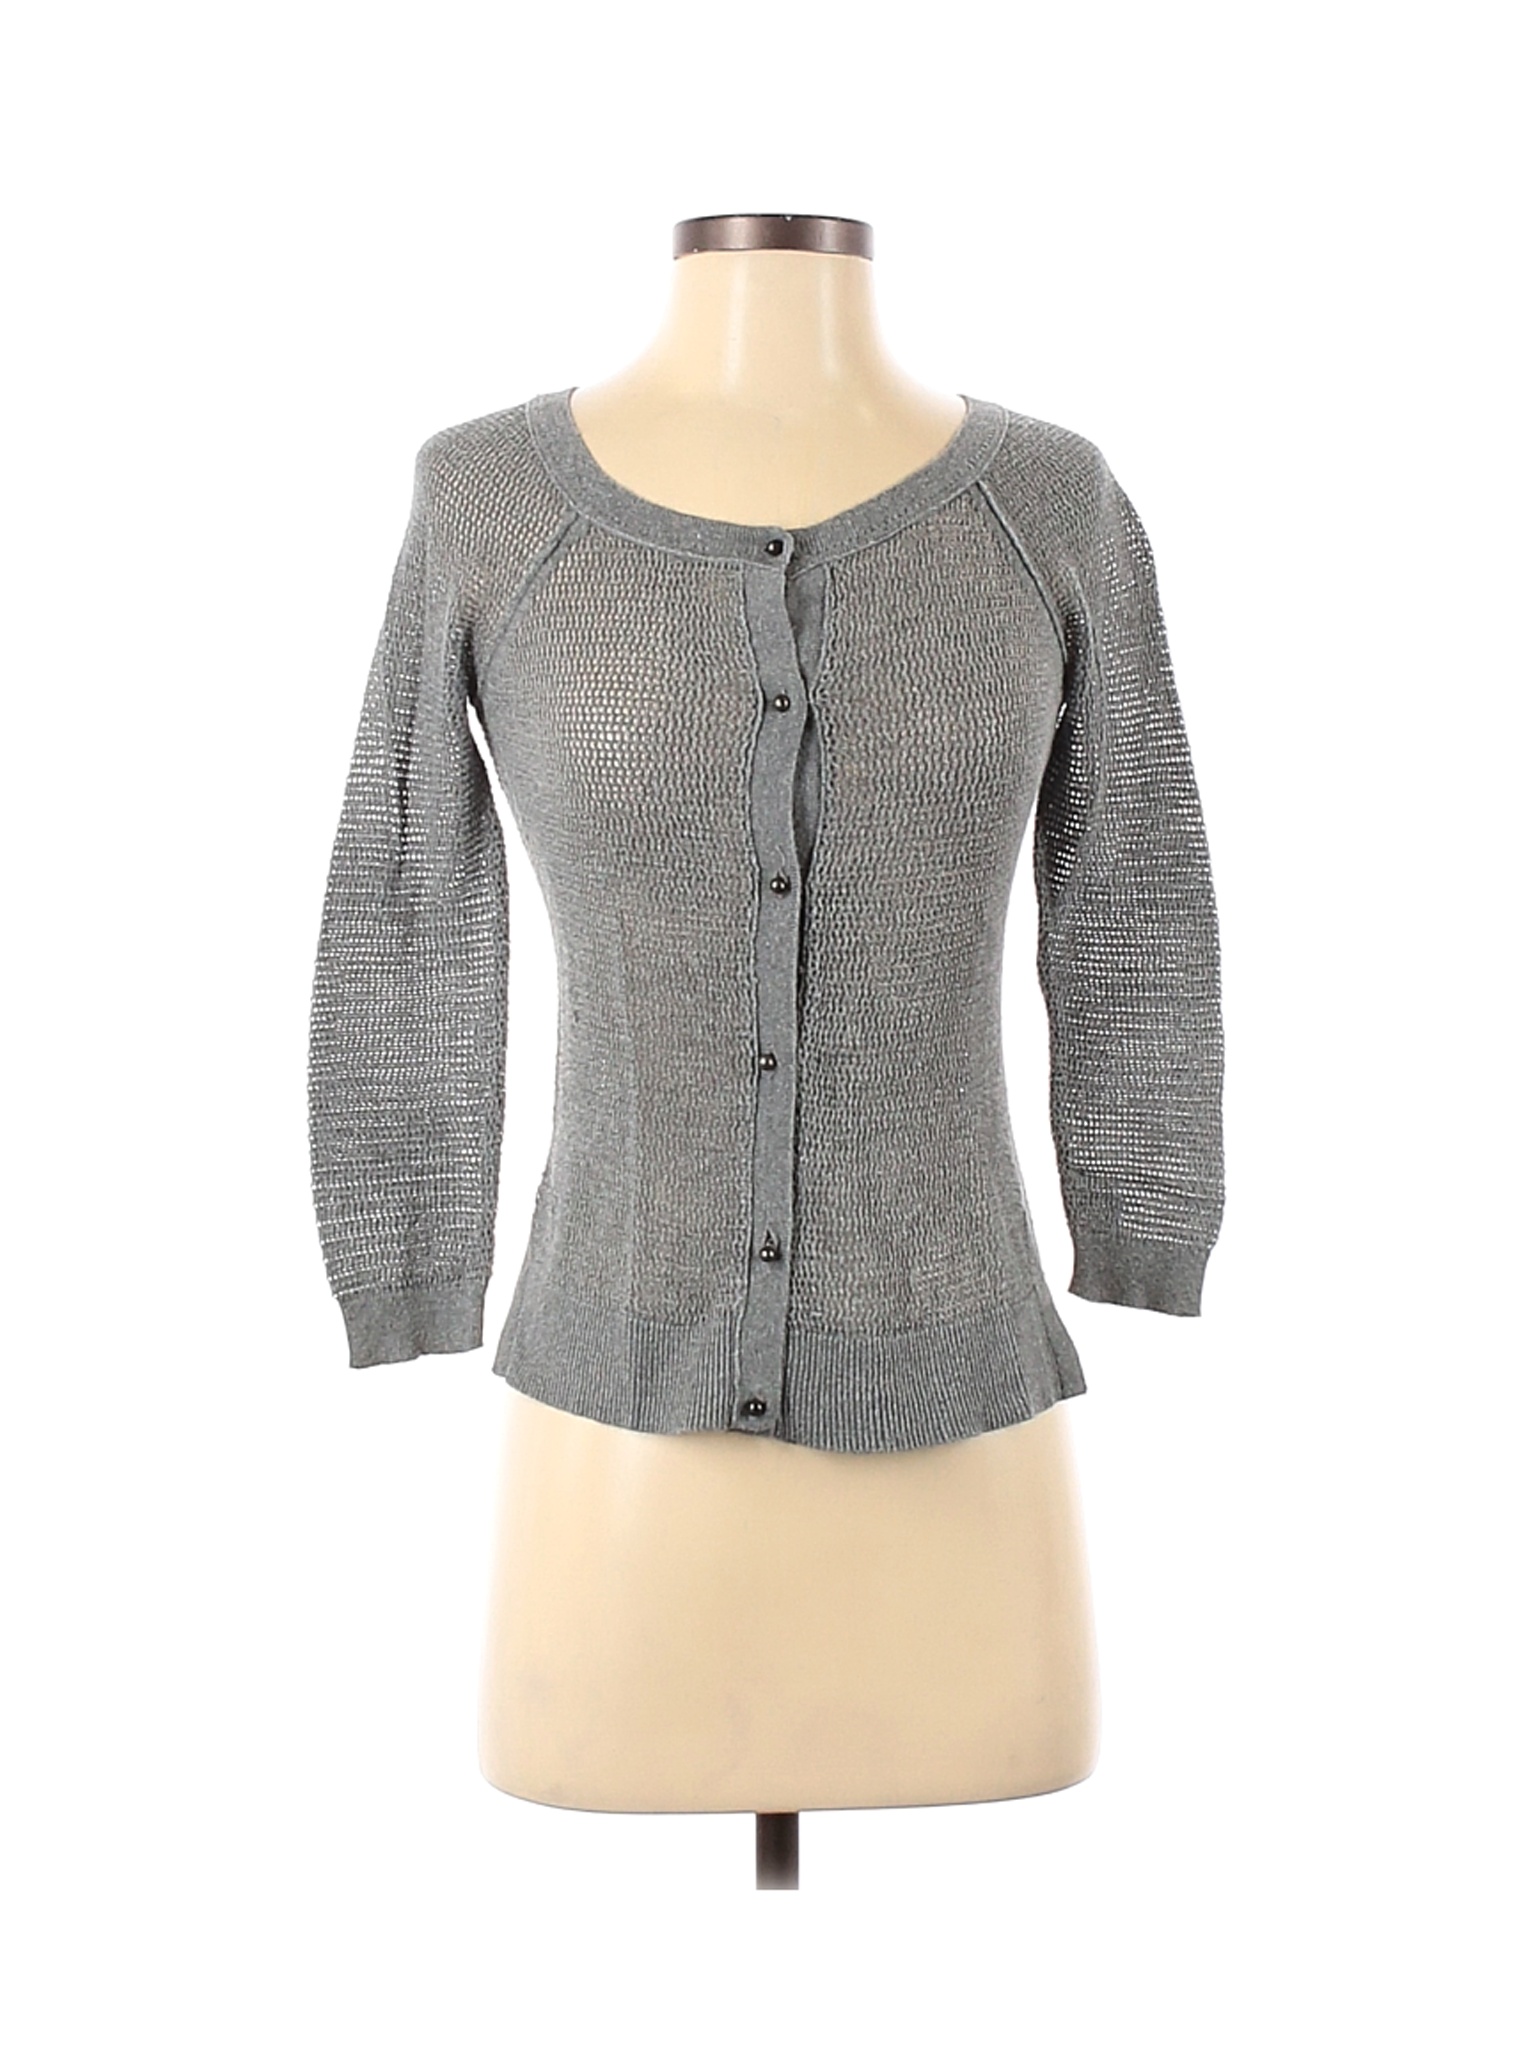 American Eagle Outfitters Women Gray Cardigan XS | eBay